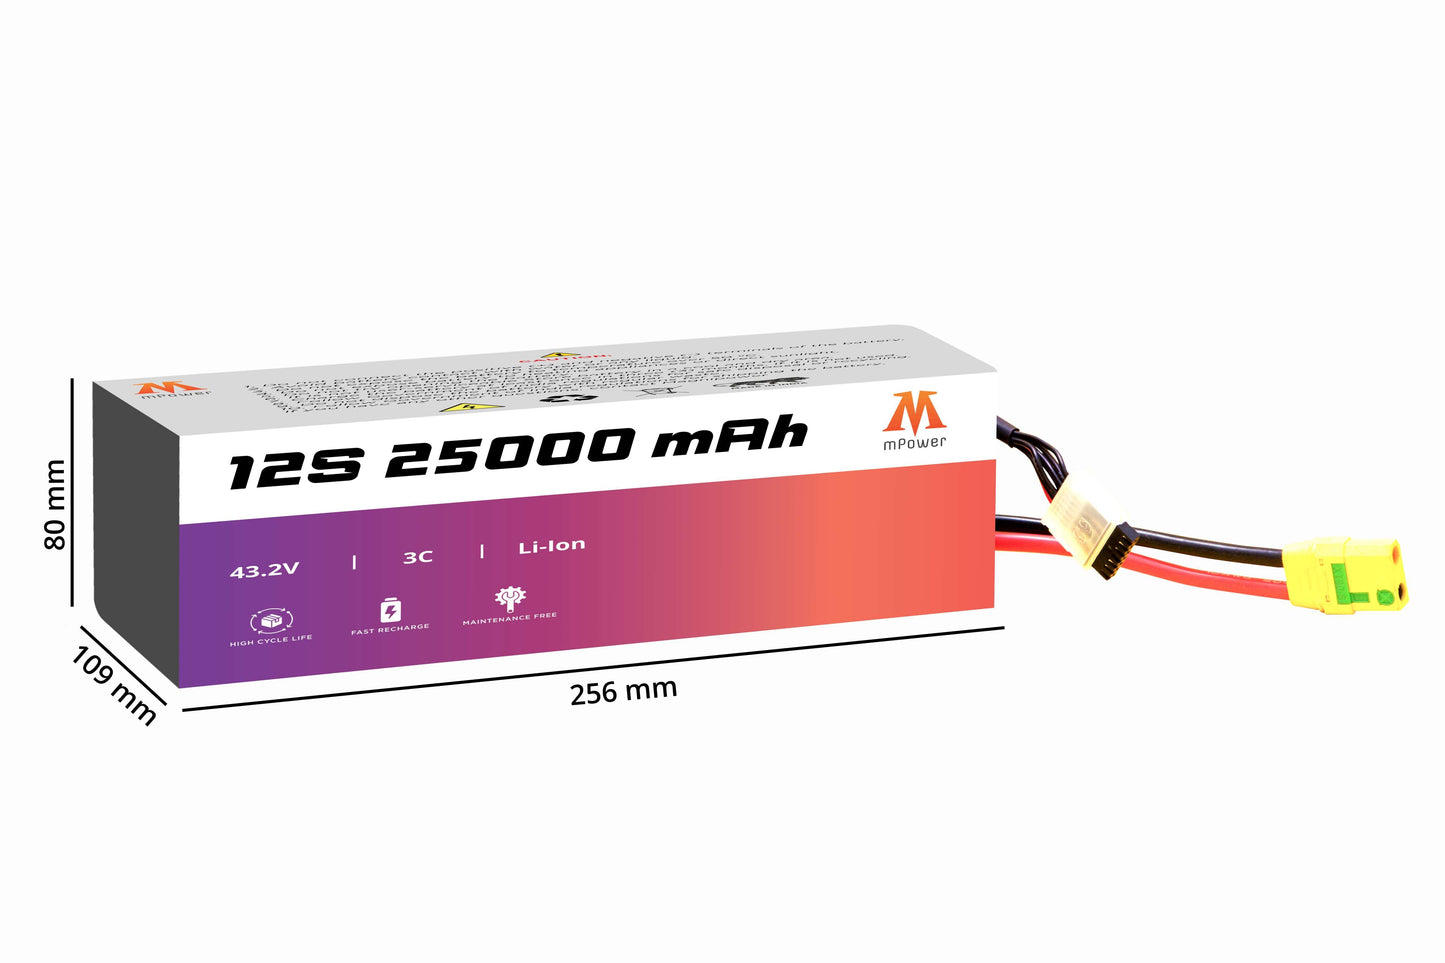 mPower 12S 25000mAh Lithium-Ion Battery for mapping Drones